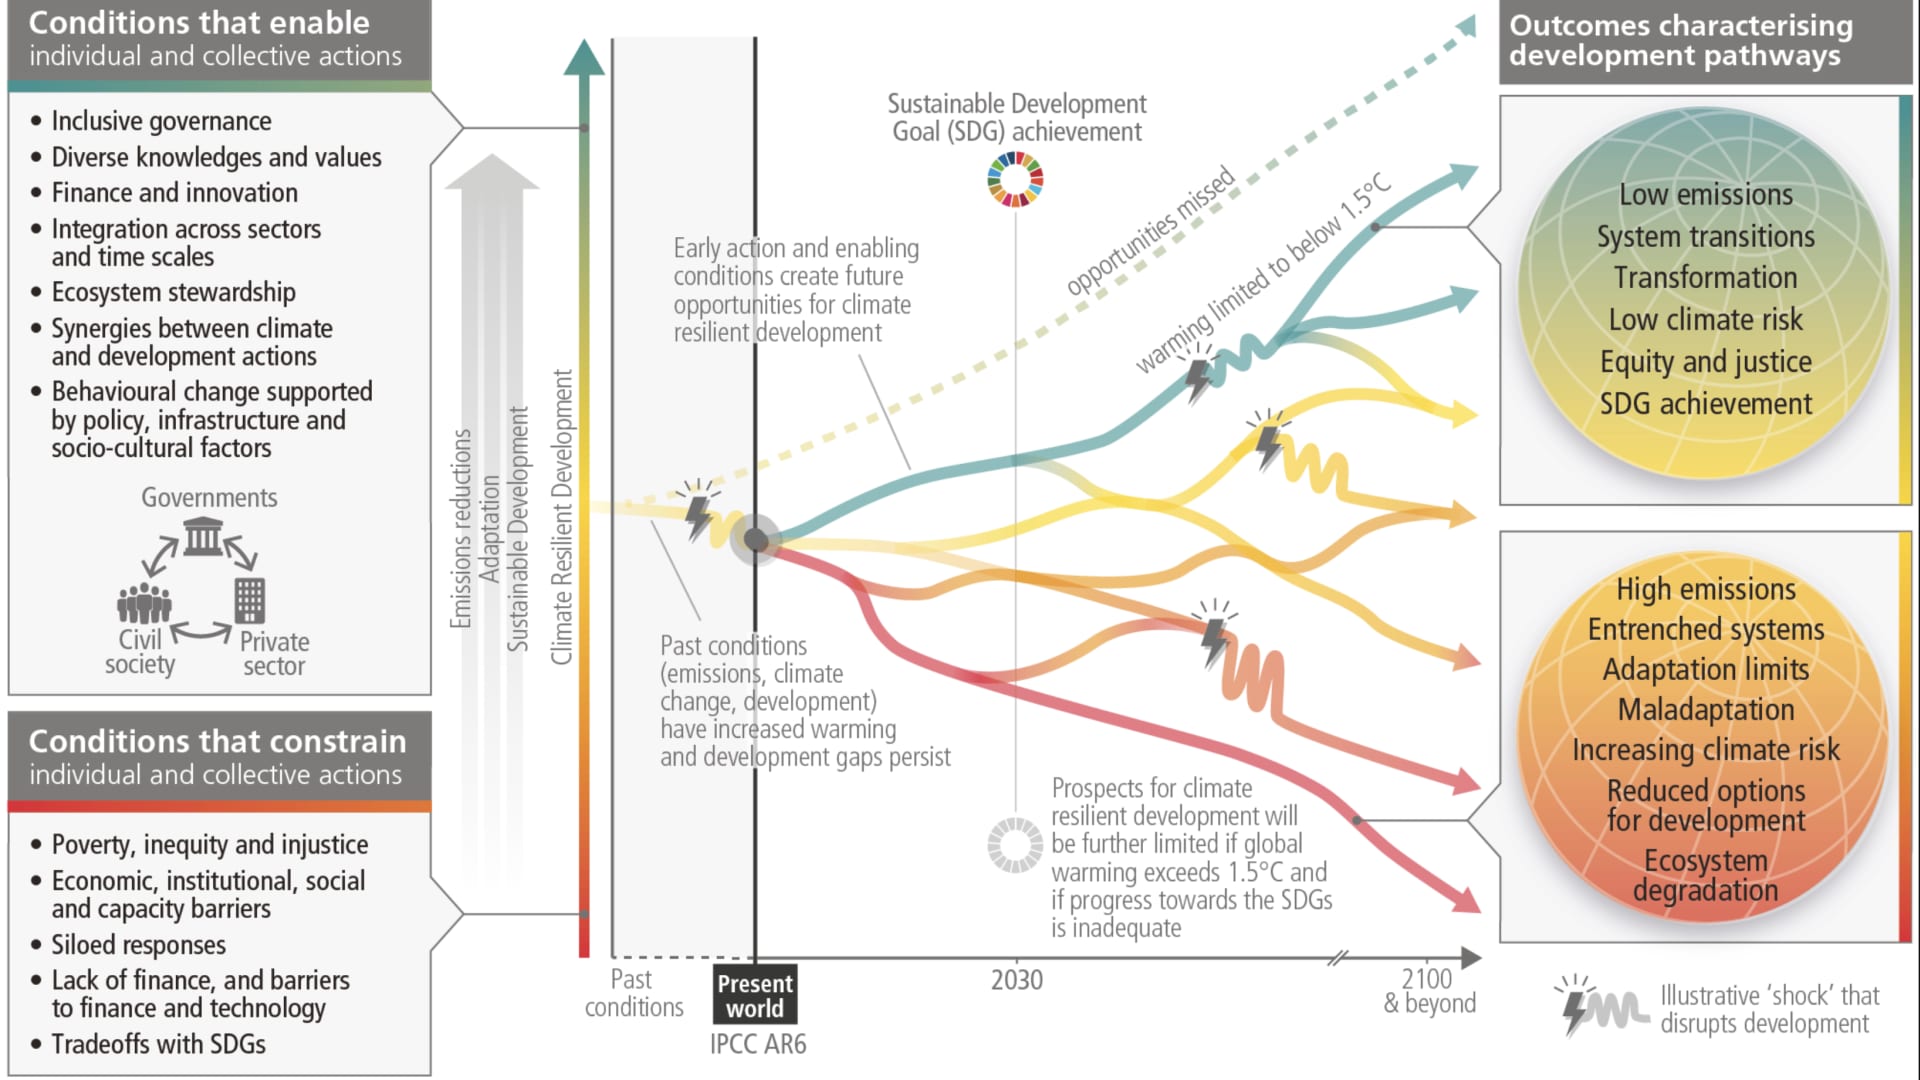 This graphic shows there is a limited window to mitigate climate change enough to enable a sustainable future. The hotter the planet gets, the less likely sustainable adaptation becomes. This chart is from the Intergovernmental Panel on Climate Change (IPCC) Sixth Assessment Report.